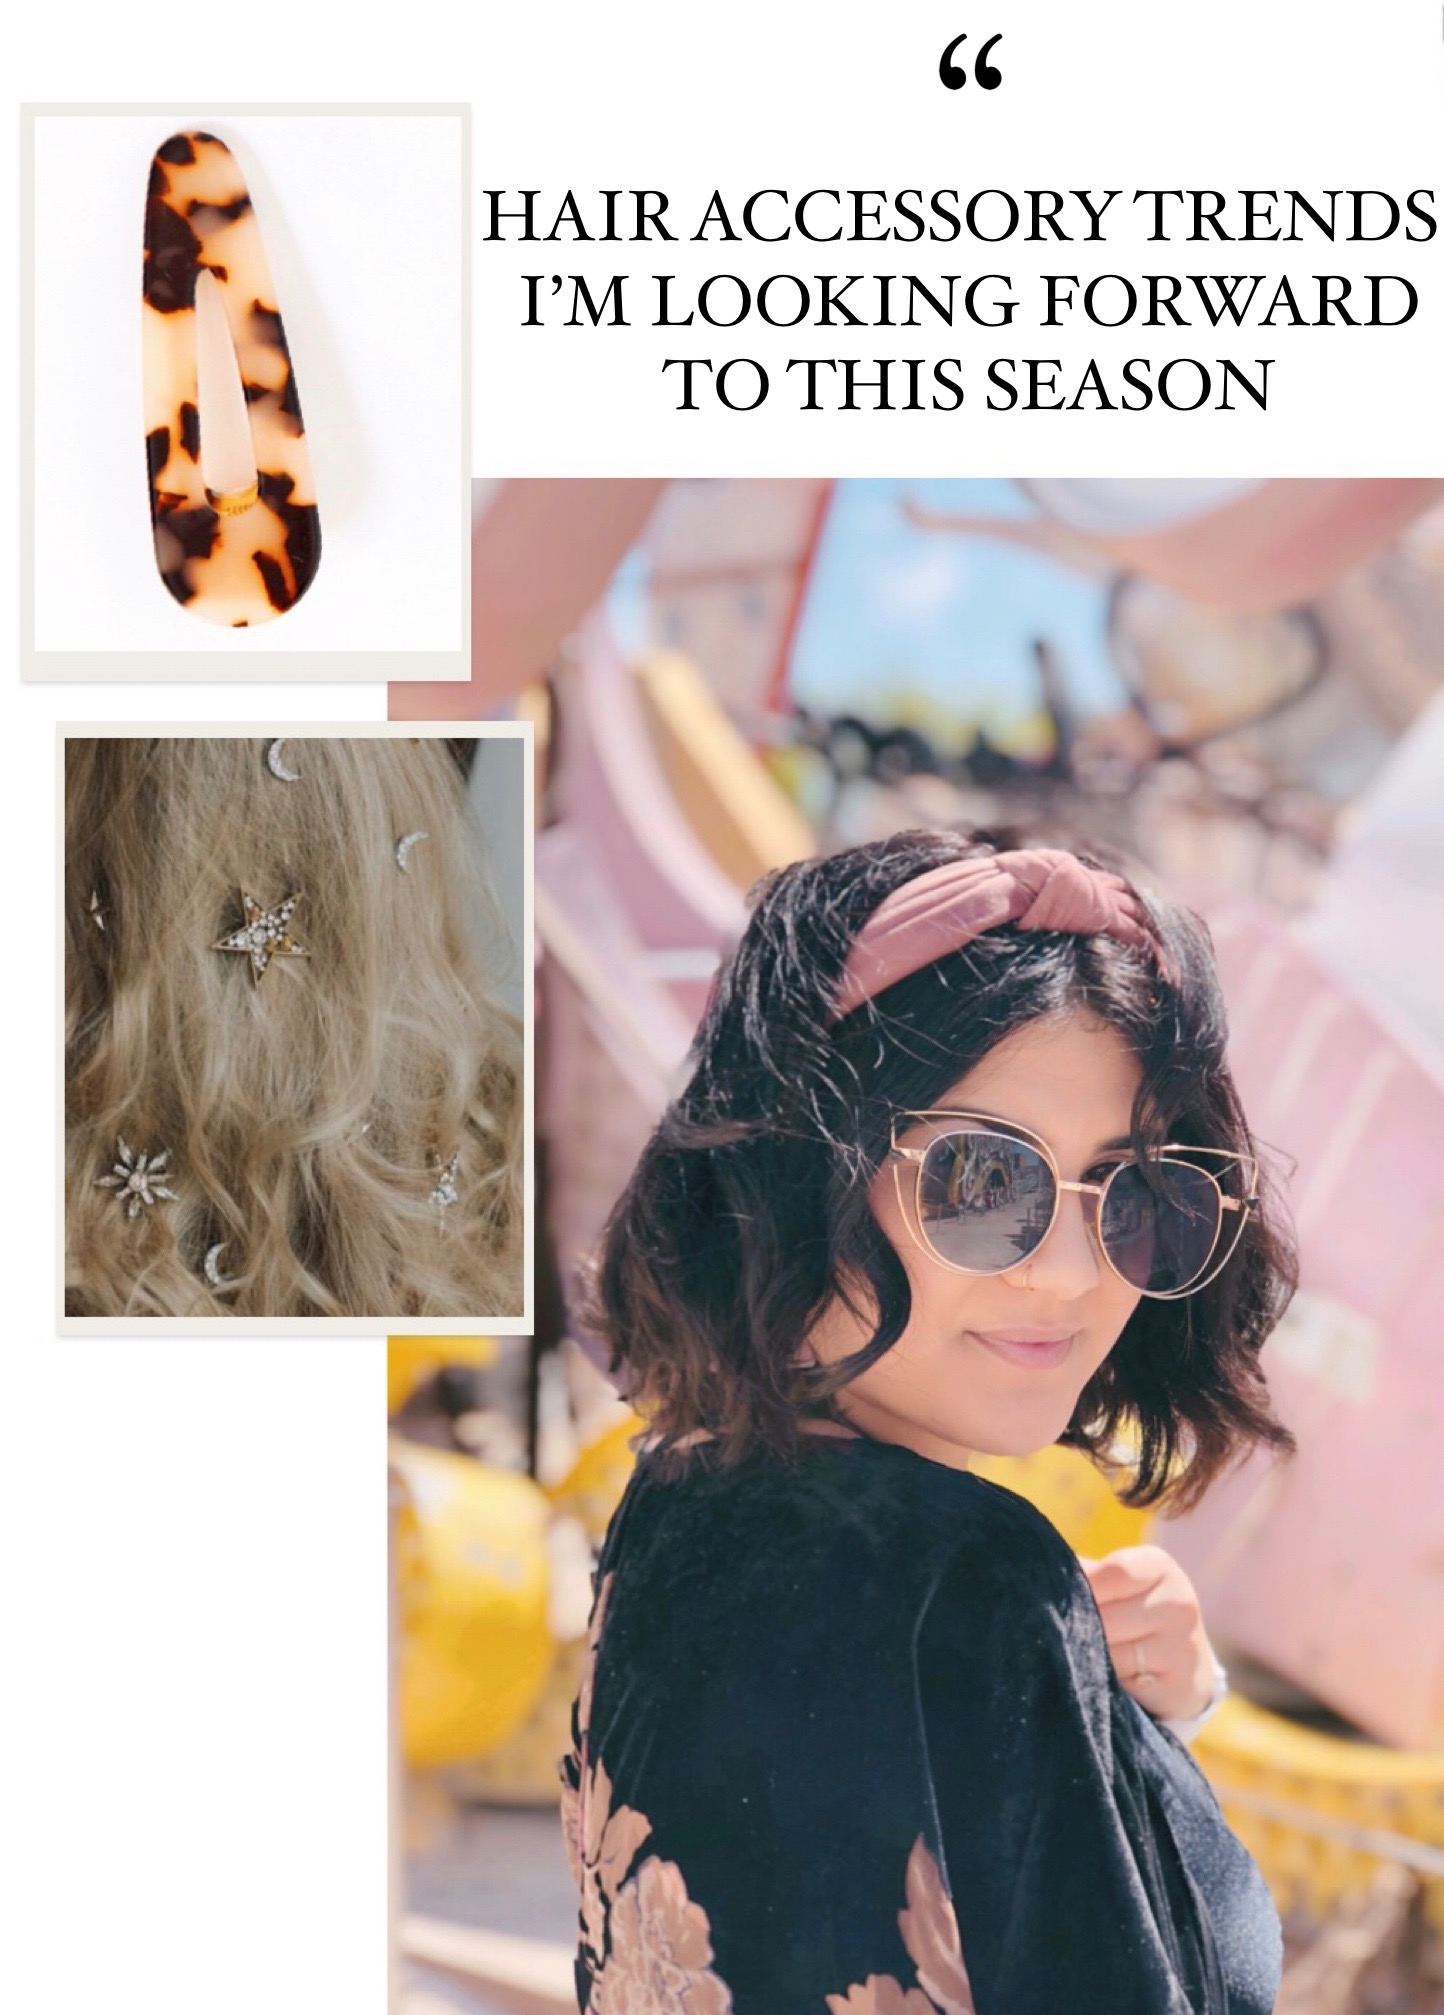 HAIR ACCESSORY TRENDS I’M LOOKING FORWARD TO THIS SEASON| 2019